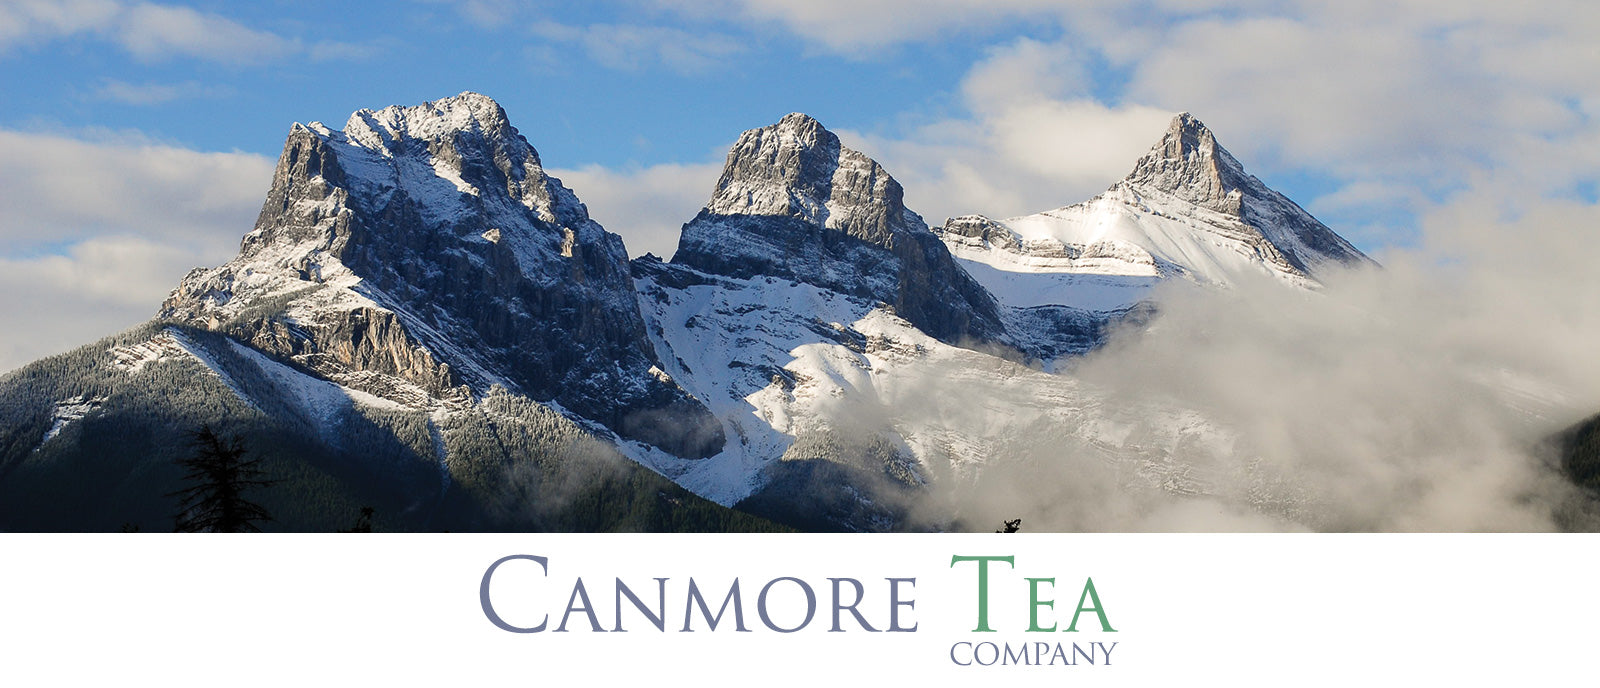 Canmore Tea Company - Buy Loose Leaf Tea Online and In-Store Canmore Alberta below The Three Sisters Mountains and just outside Banff National Park, 45 minutes from Calgary